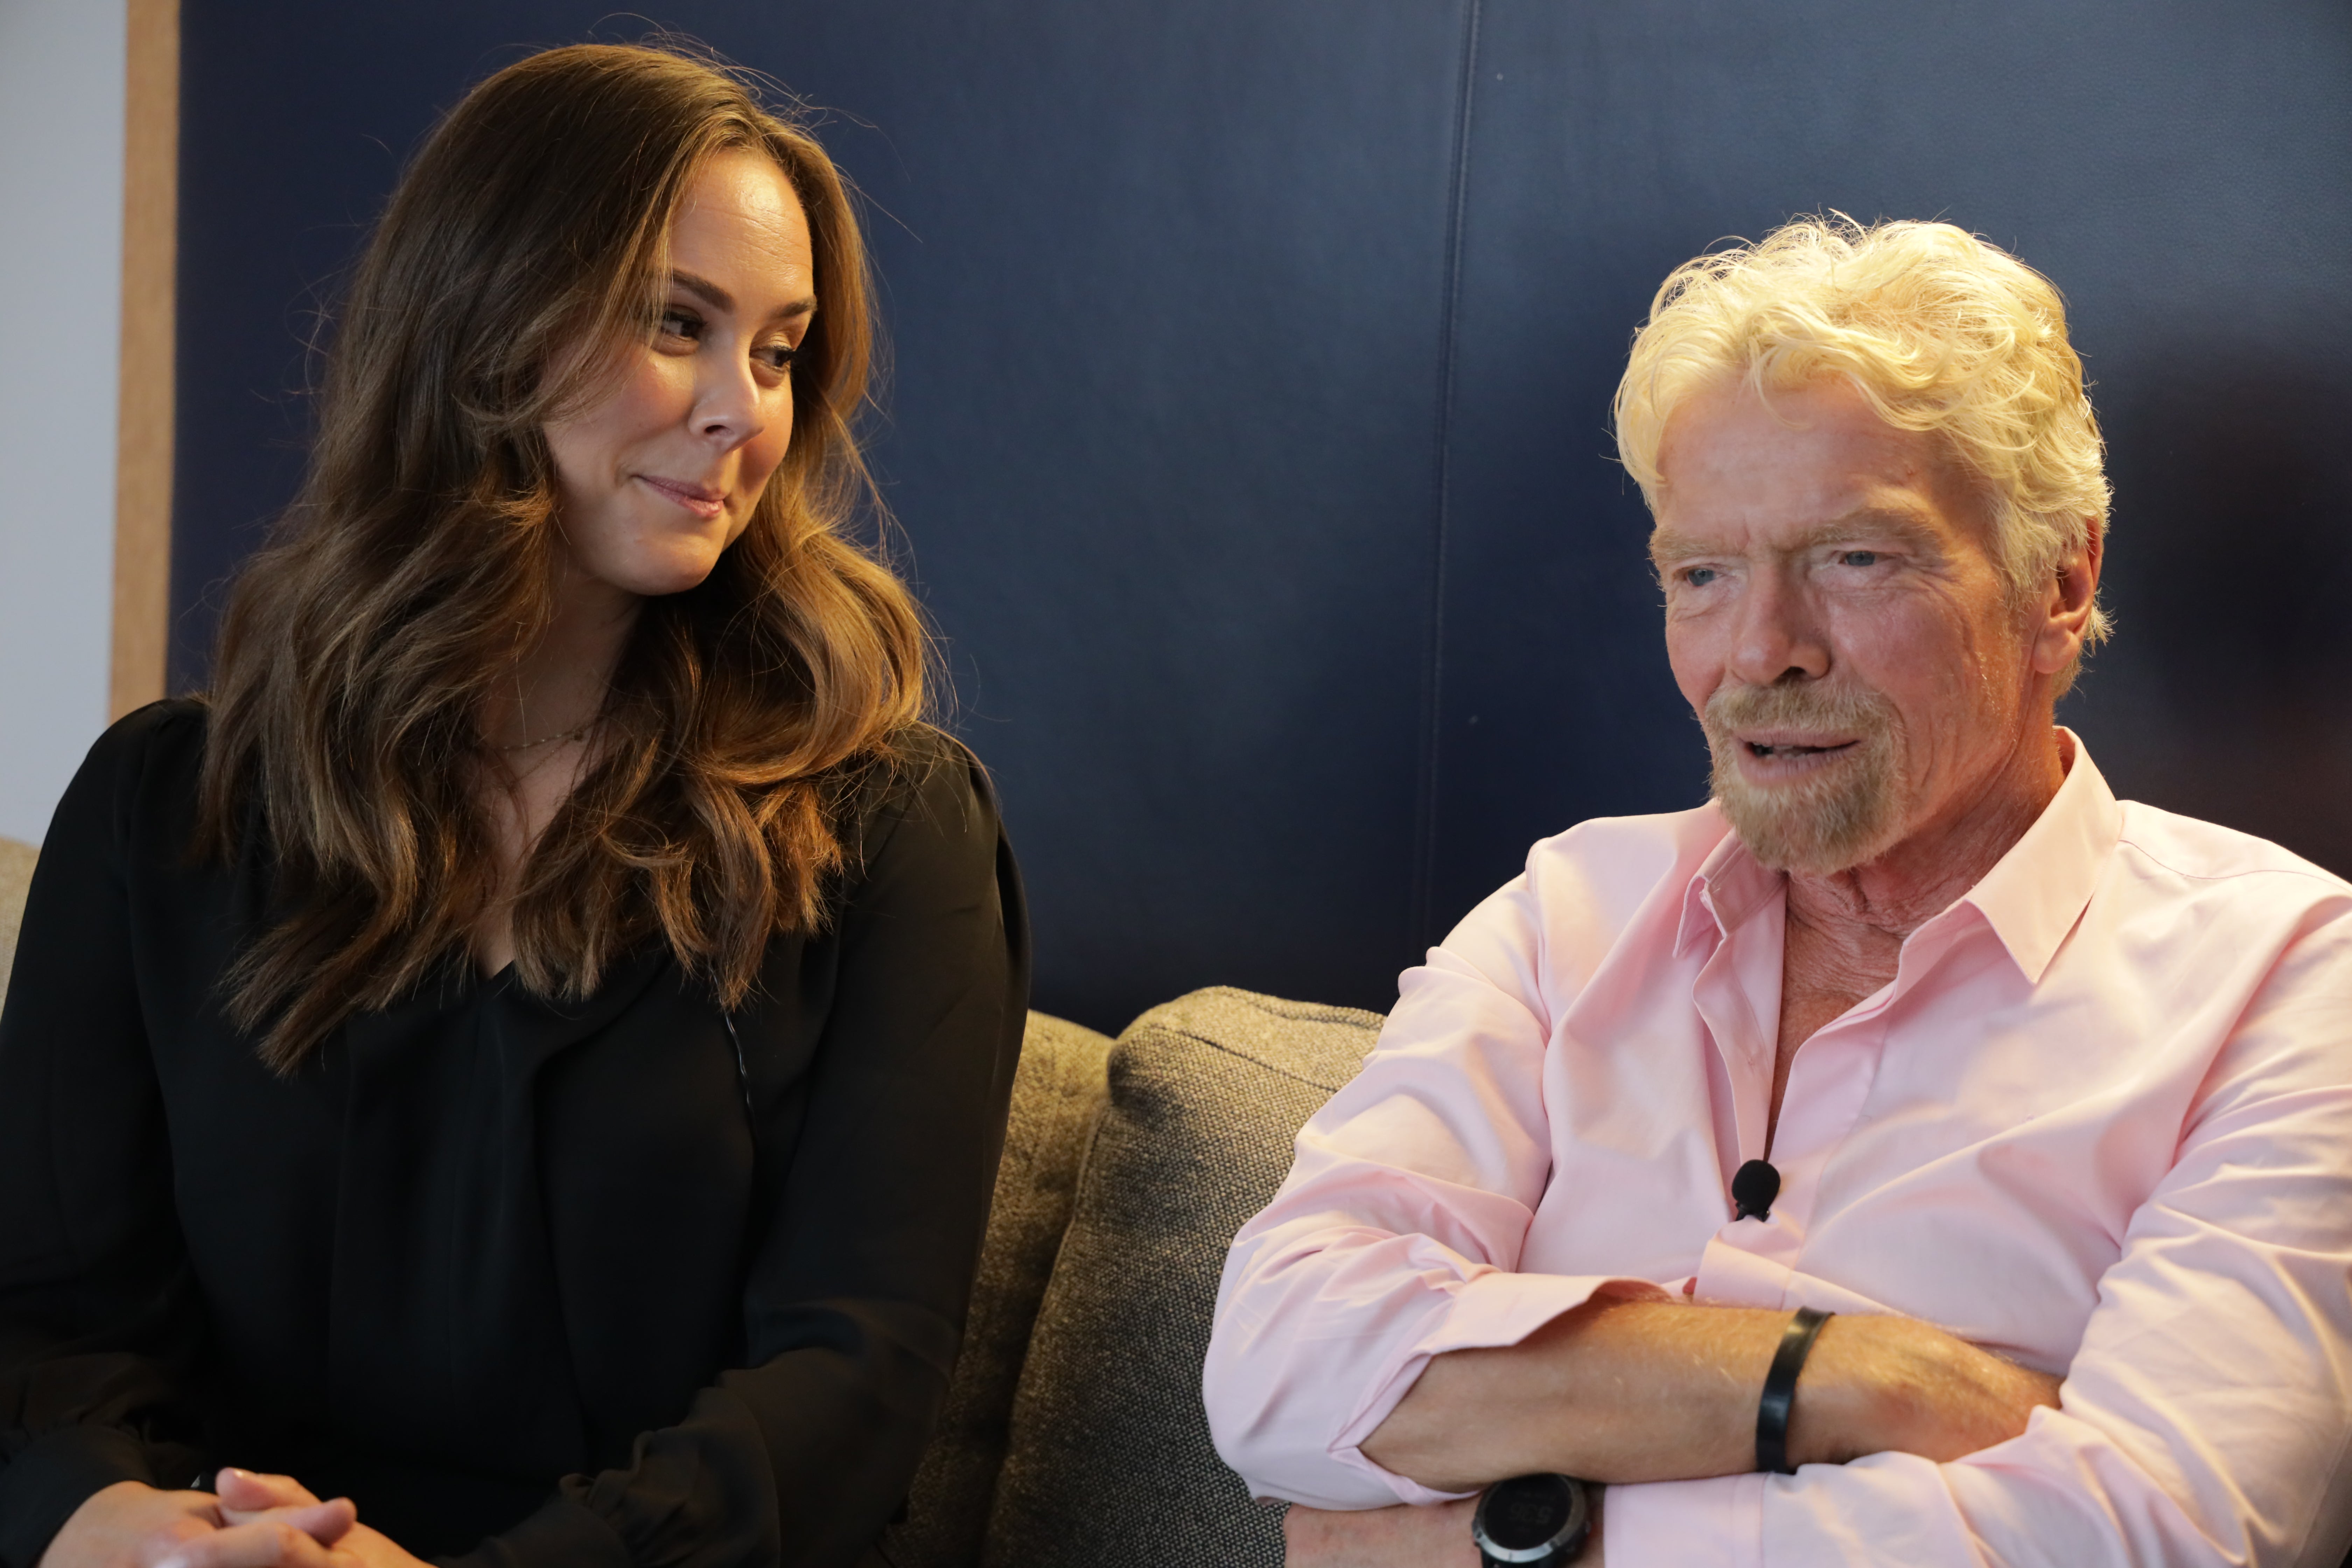 RBIJ CEO Celia Ouellette and Virgin Group founder Sir Richard Branson discuss abolishing the death penalty in New York City, on 6 October, 2021.